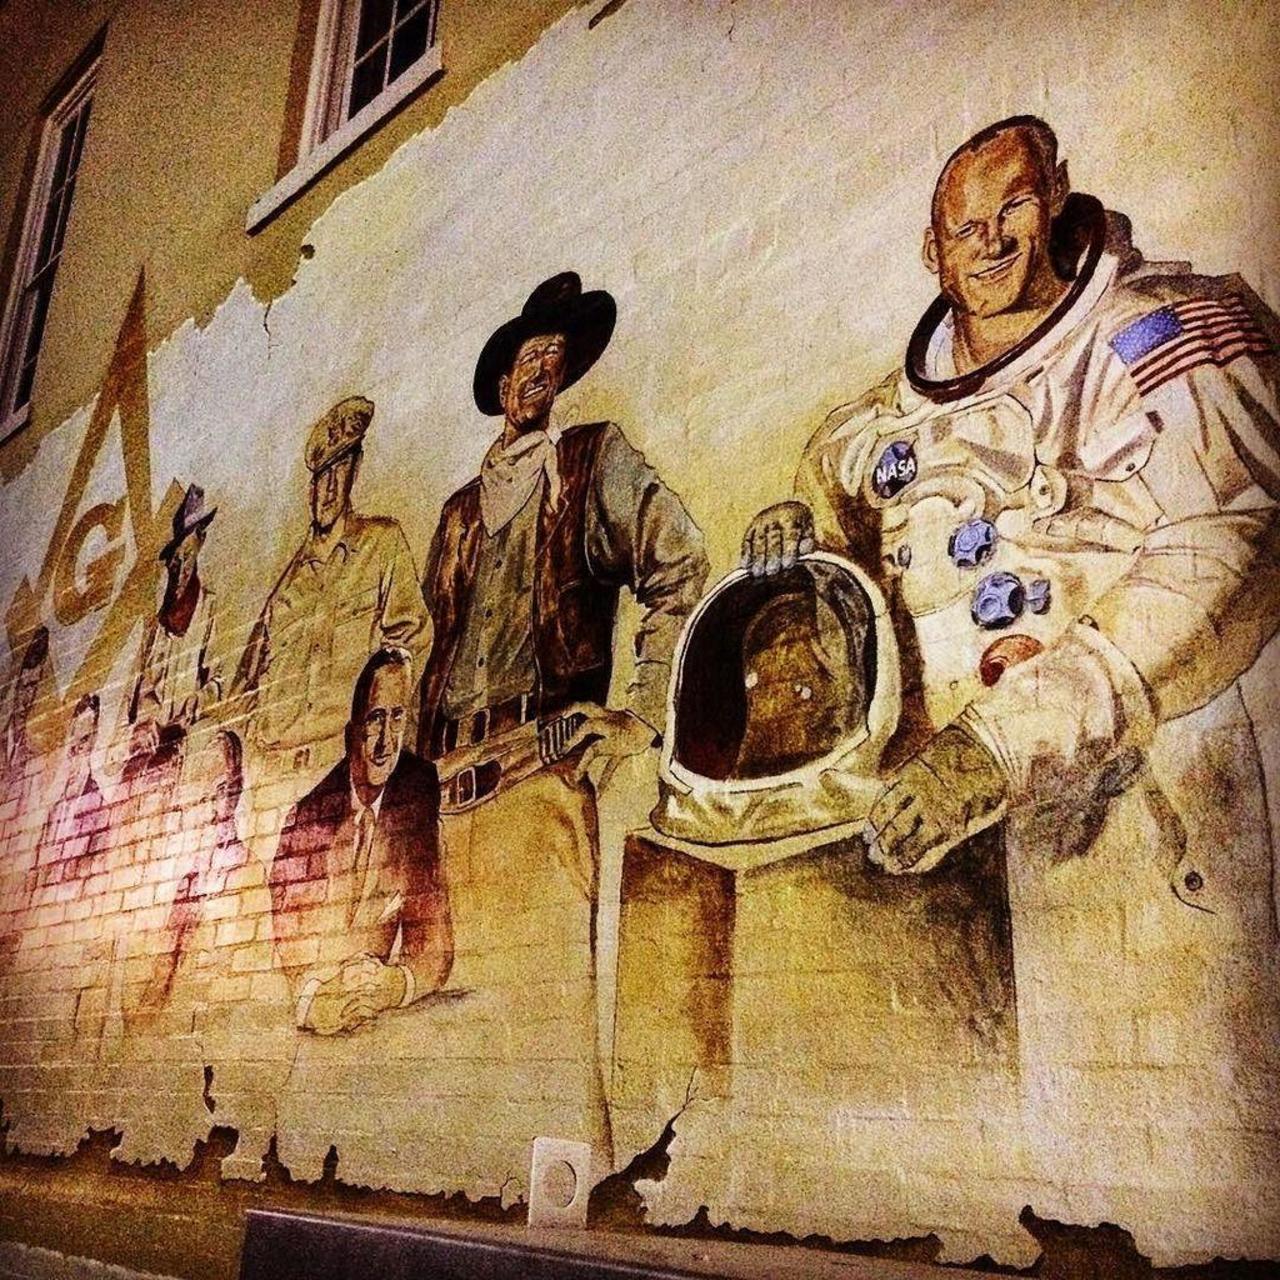 RT @vedanta: #armstrong #streetart #art #texas #grapevine #dallas #graffiti #downtown #wall #legacy #country #dfw #spring #wine … http://t.co/wMkT3zb64T